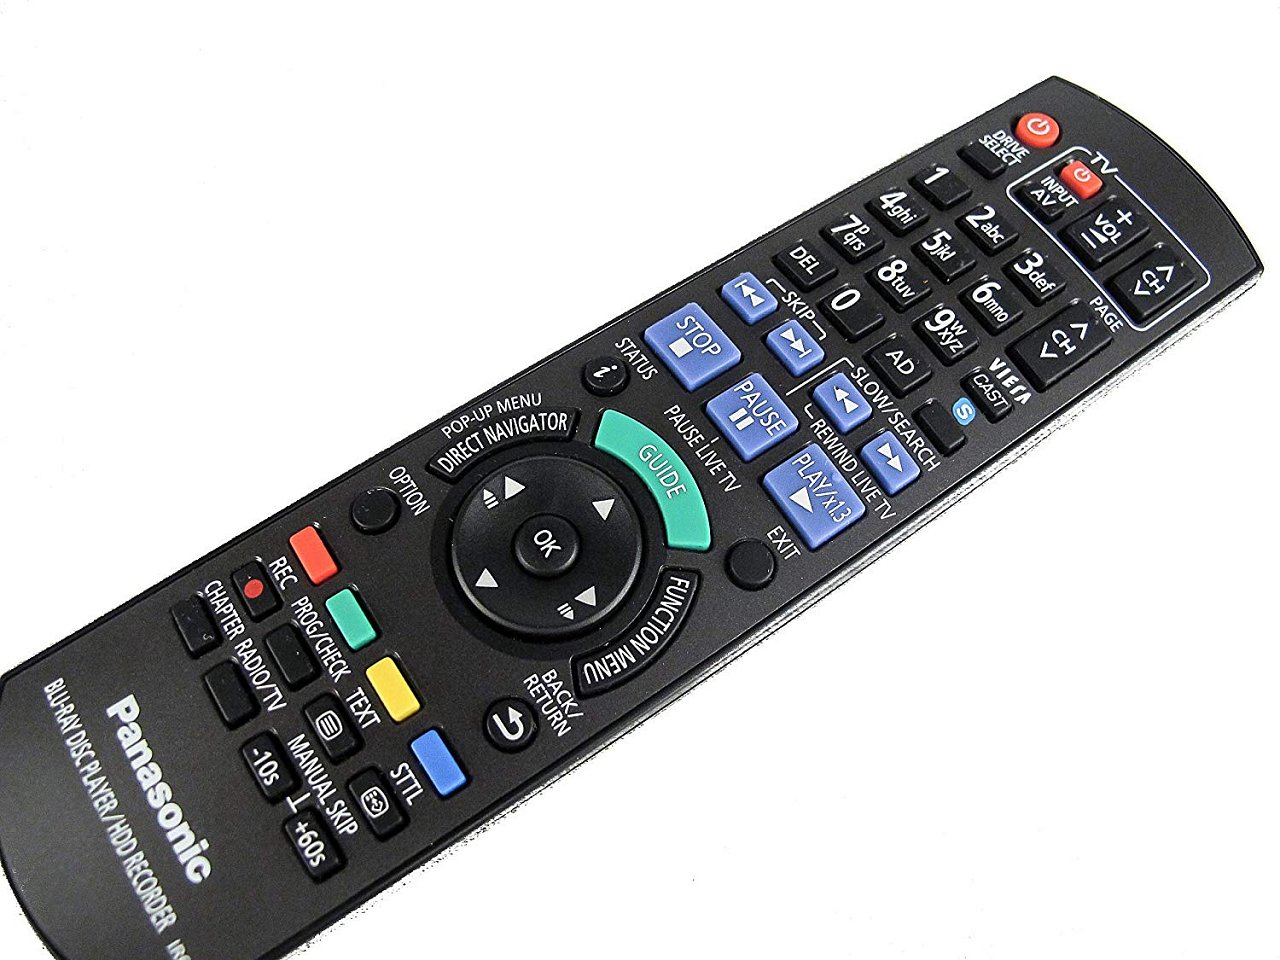 Panasonic N2QAYB000615 replacement remote control different look